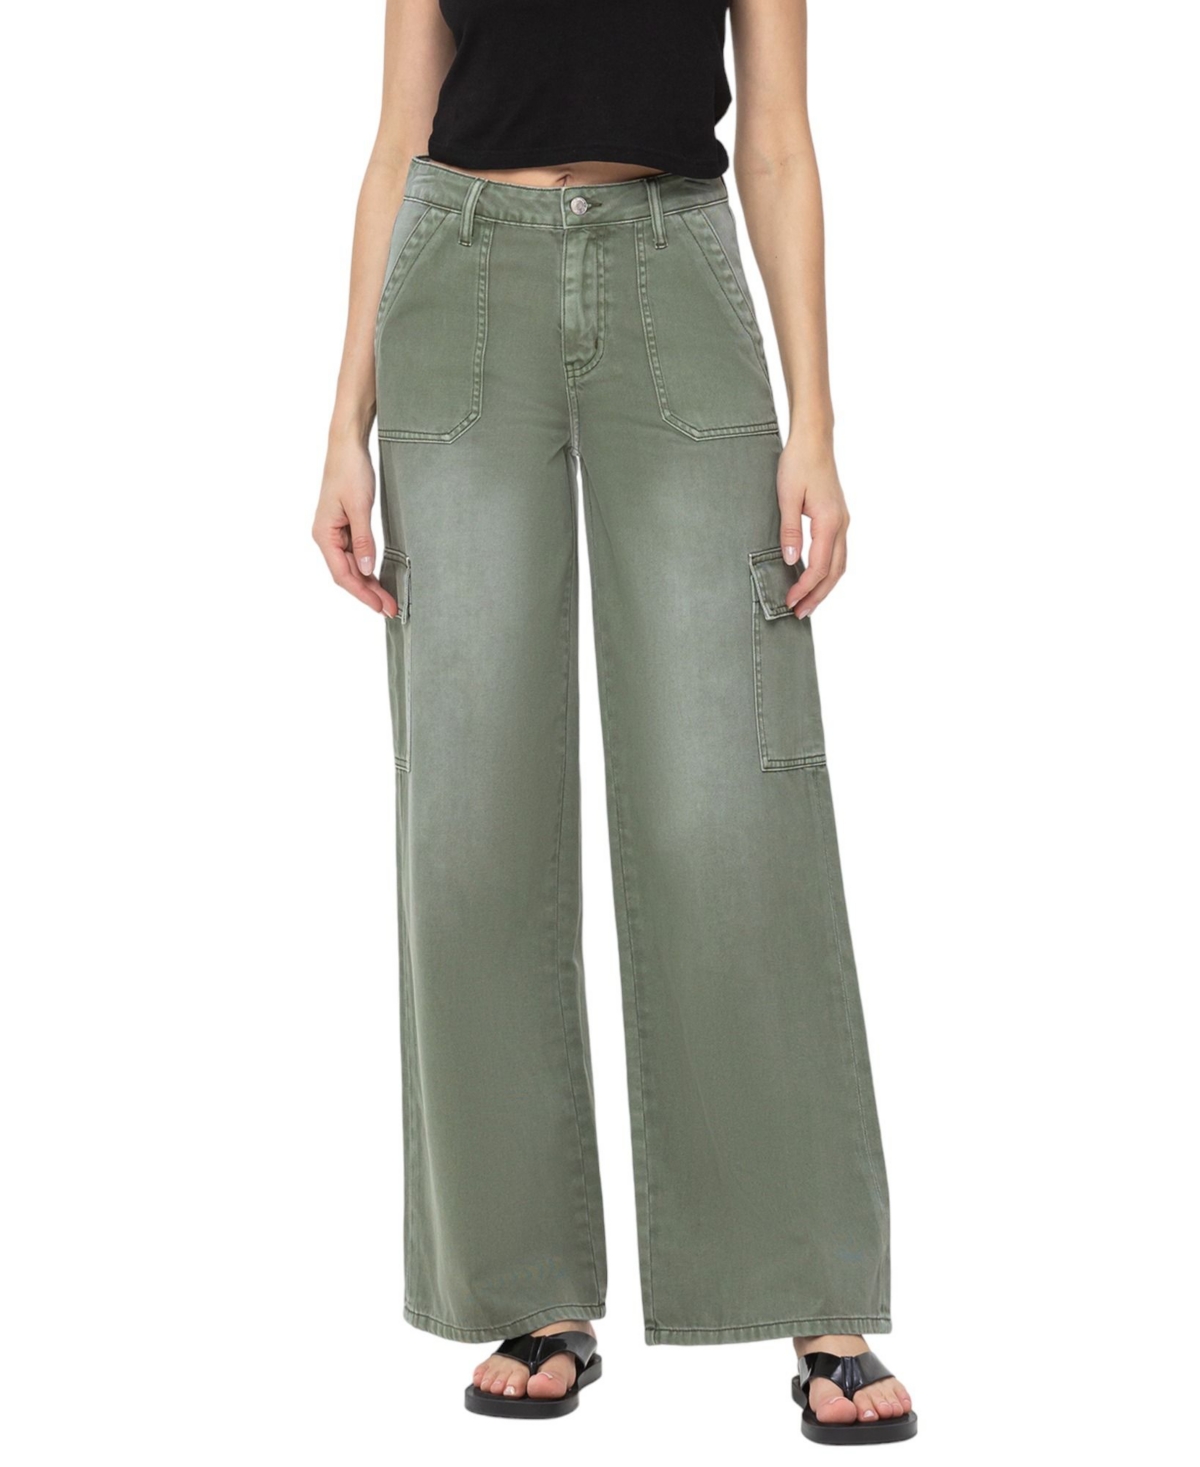 Women's High Rise Utility Cargo Wide Leg Jeans - Army green